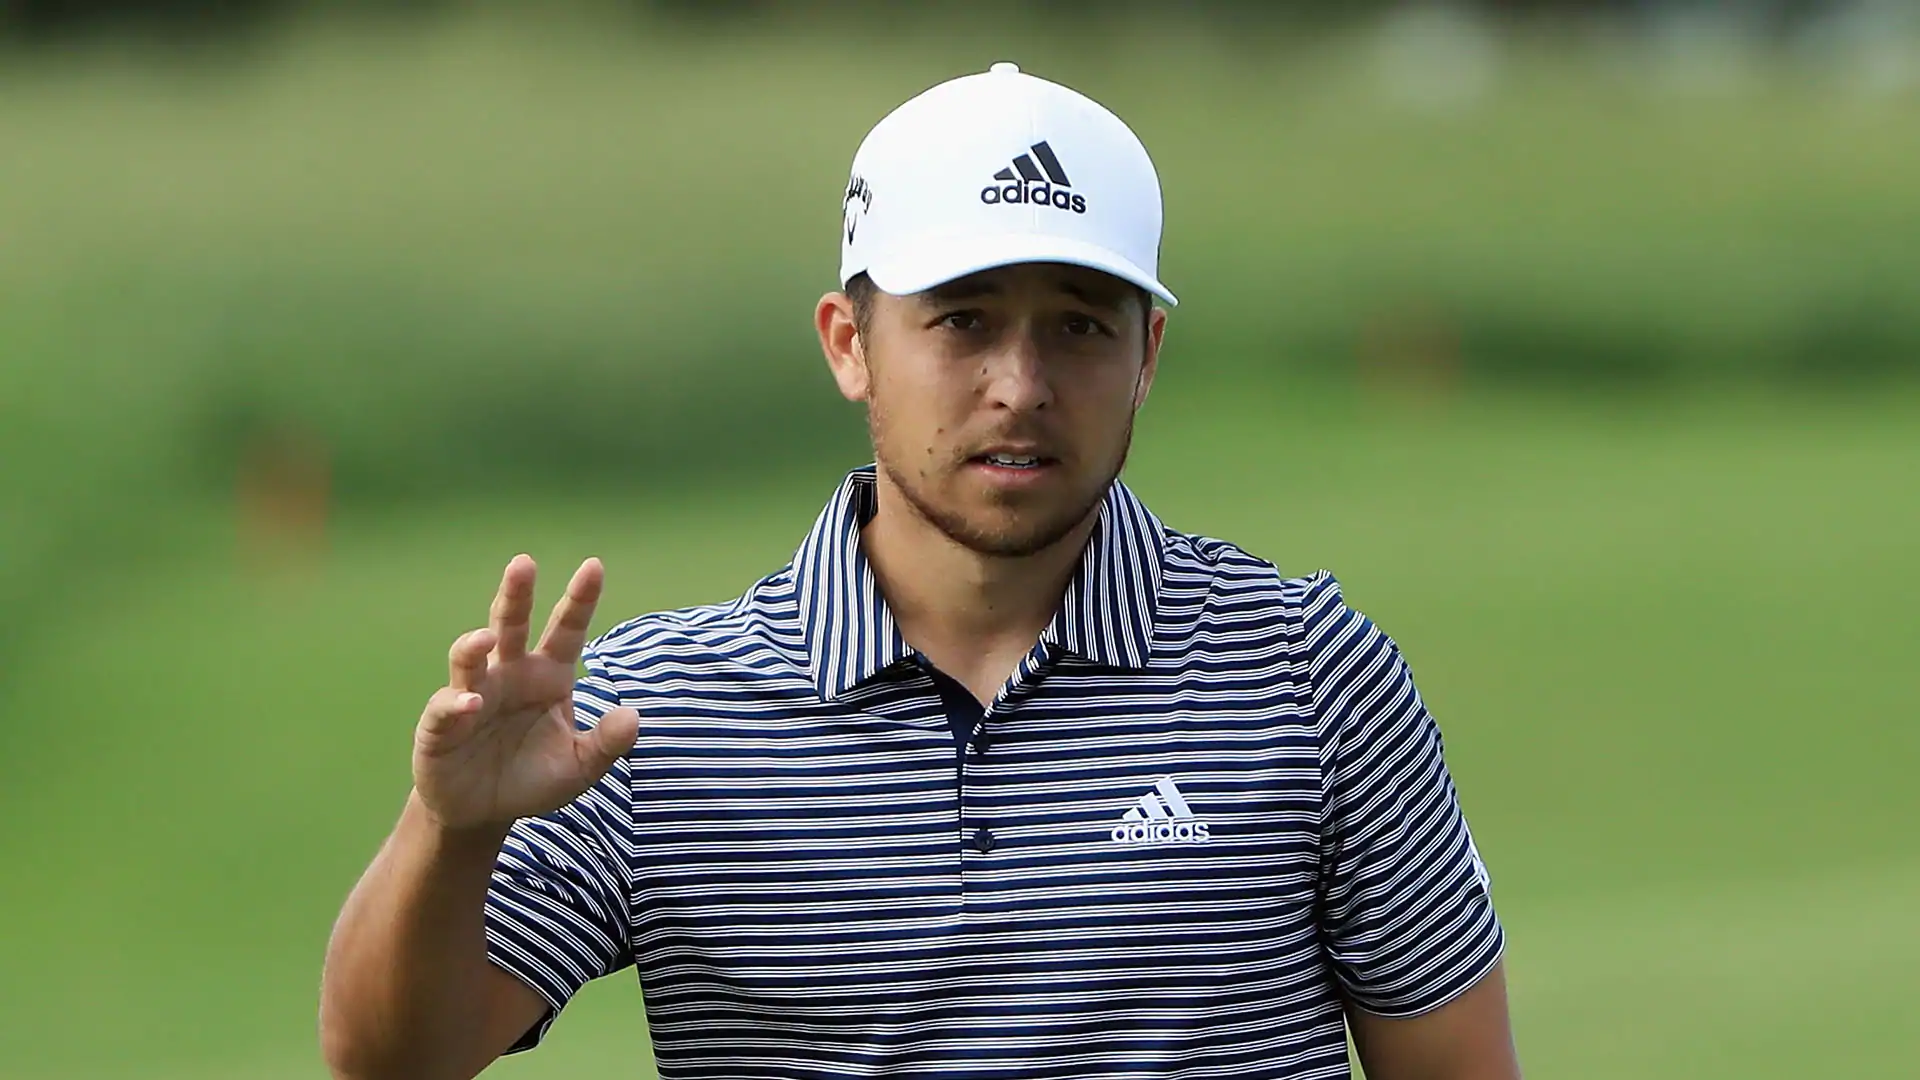 Watch: Schauffele holes out twice, then tops drive at Sentry TOC